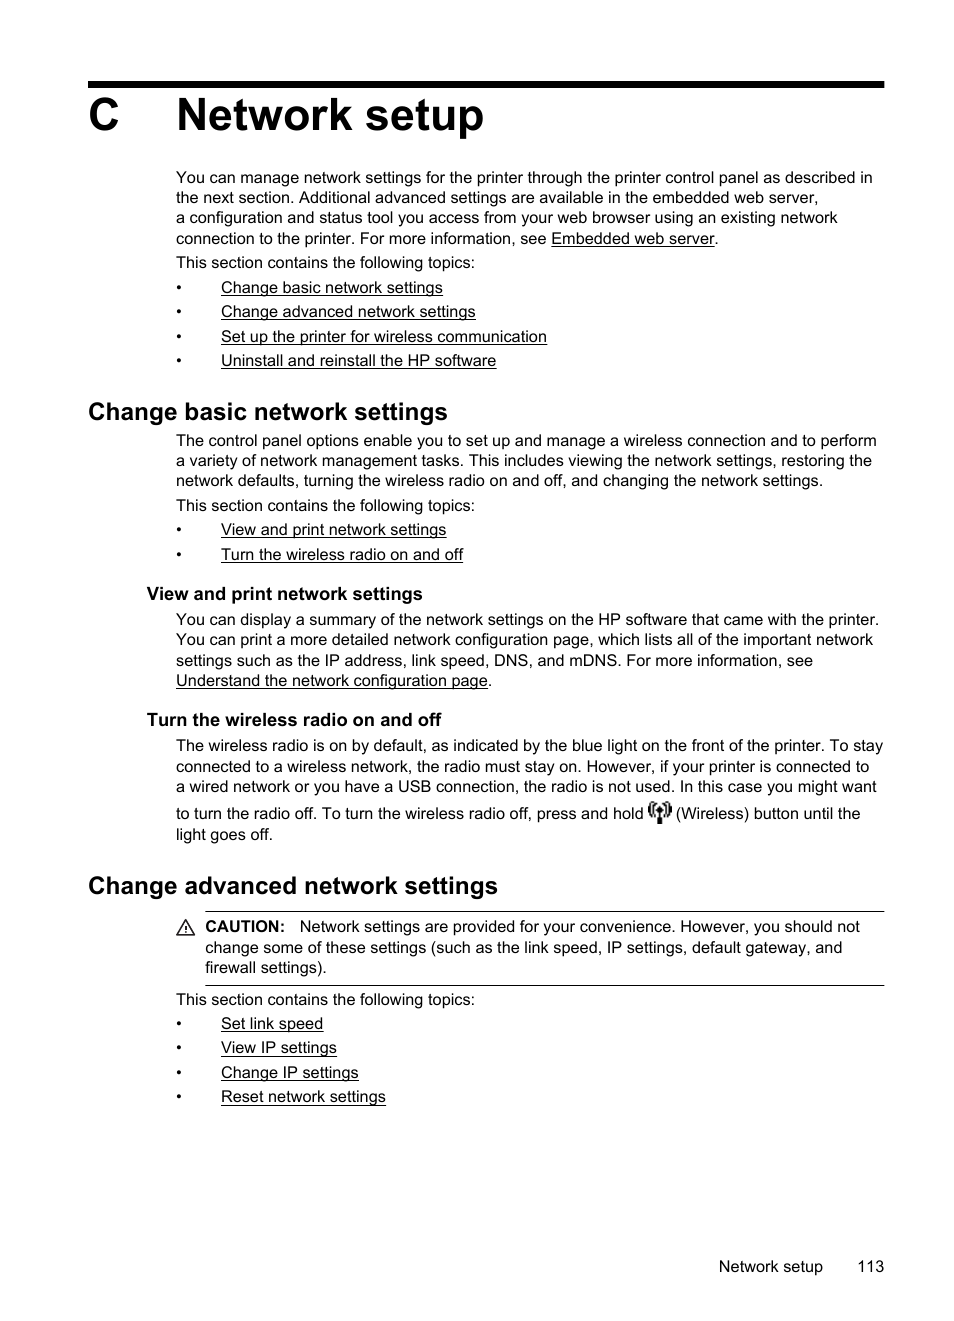 Network setup, Change basic network settings, View and print network settings | Turn the wireless radio on and off, Change advanced network settings, Cnetwork setup | HP Officejet 6100 User Manual | Page 117 / 138